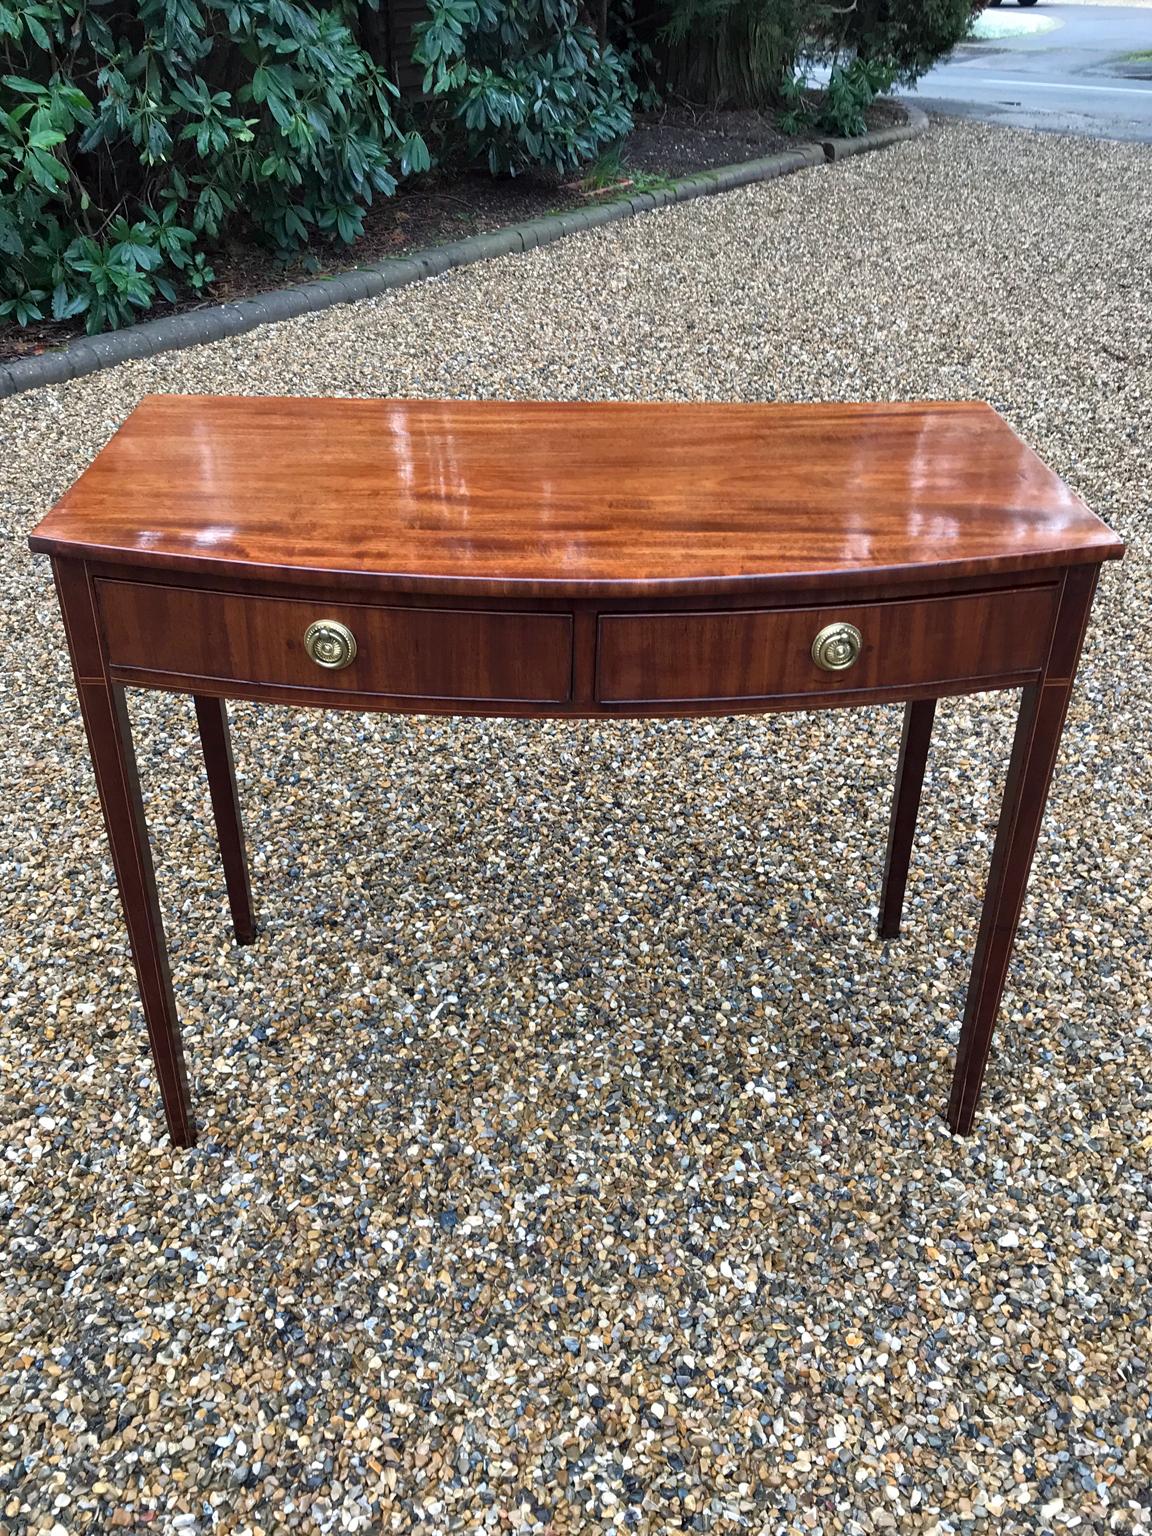 19th century English Regency mahogany bow fronted side table, fitted with two mahogany drawers and brass ring handles, on square tapering legs,

circa 1830.

Dimensions:
Width 38.5 inches – 98 cms
Side depth 17 inches – 43.5 cms
Height 30.5